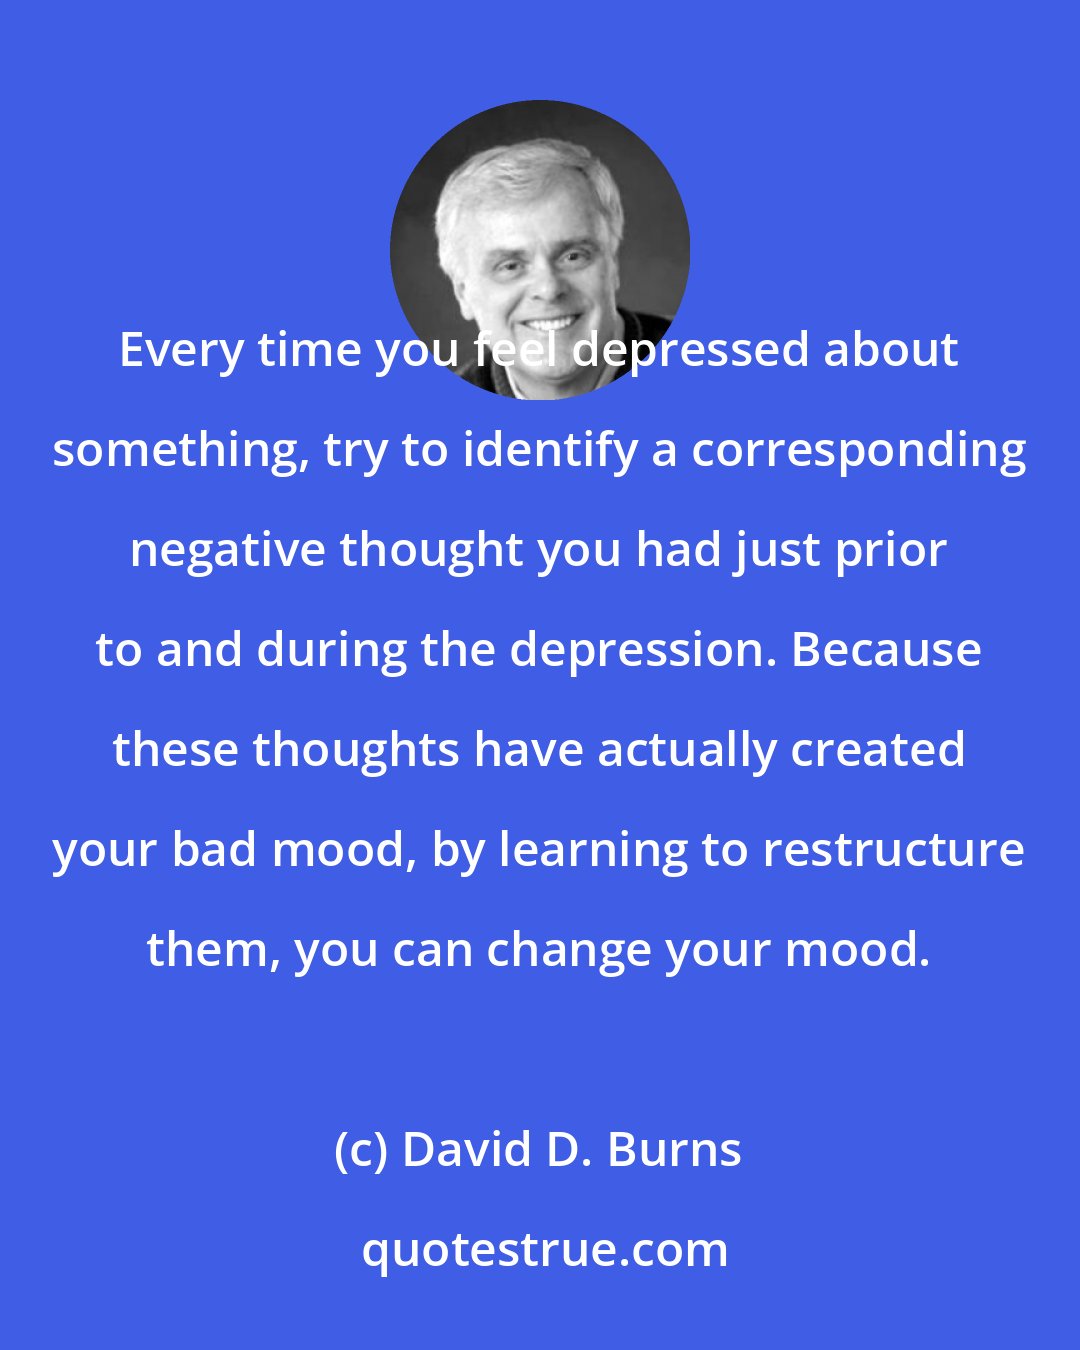 David D. Burns: Every time you feel depressed about something, try to identify a corresponding negative thought you had just prior to and during the depression. Because these thoughts have actually created your bad mood, by learning to restructure them, you can change your mood.